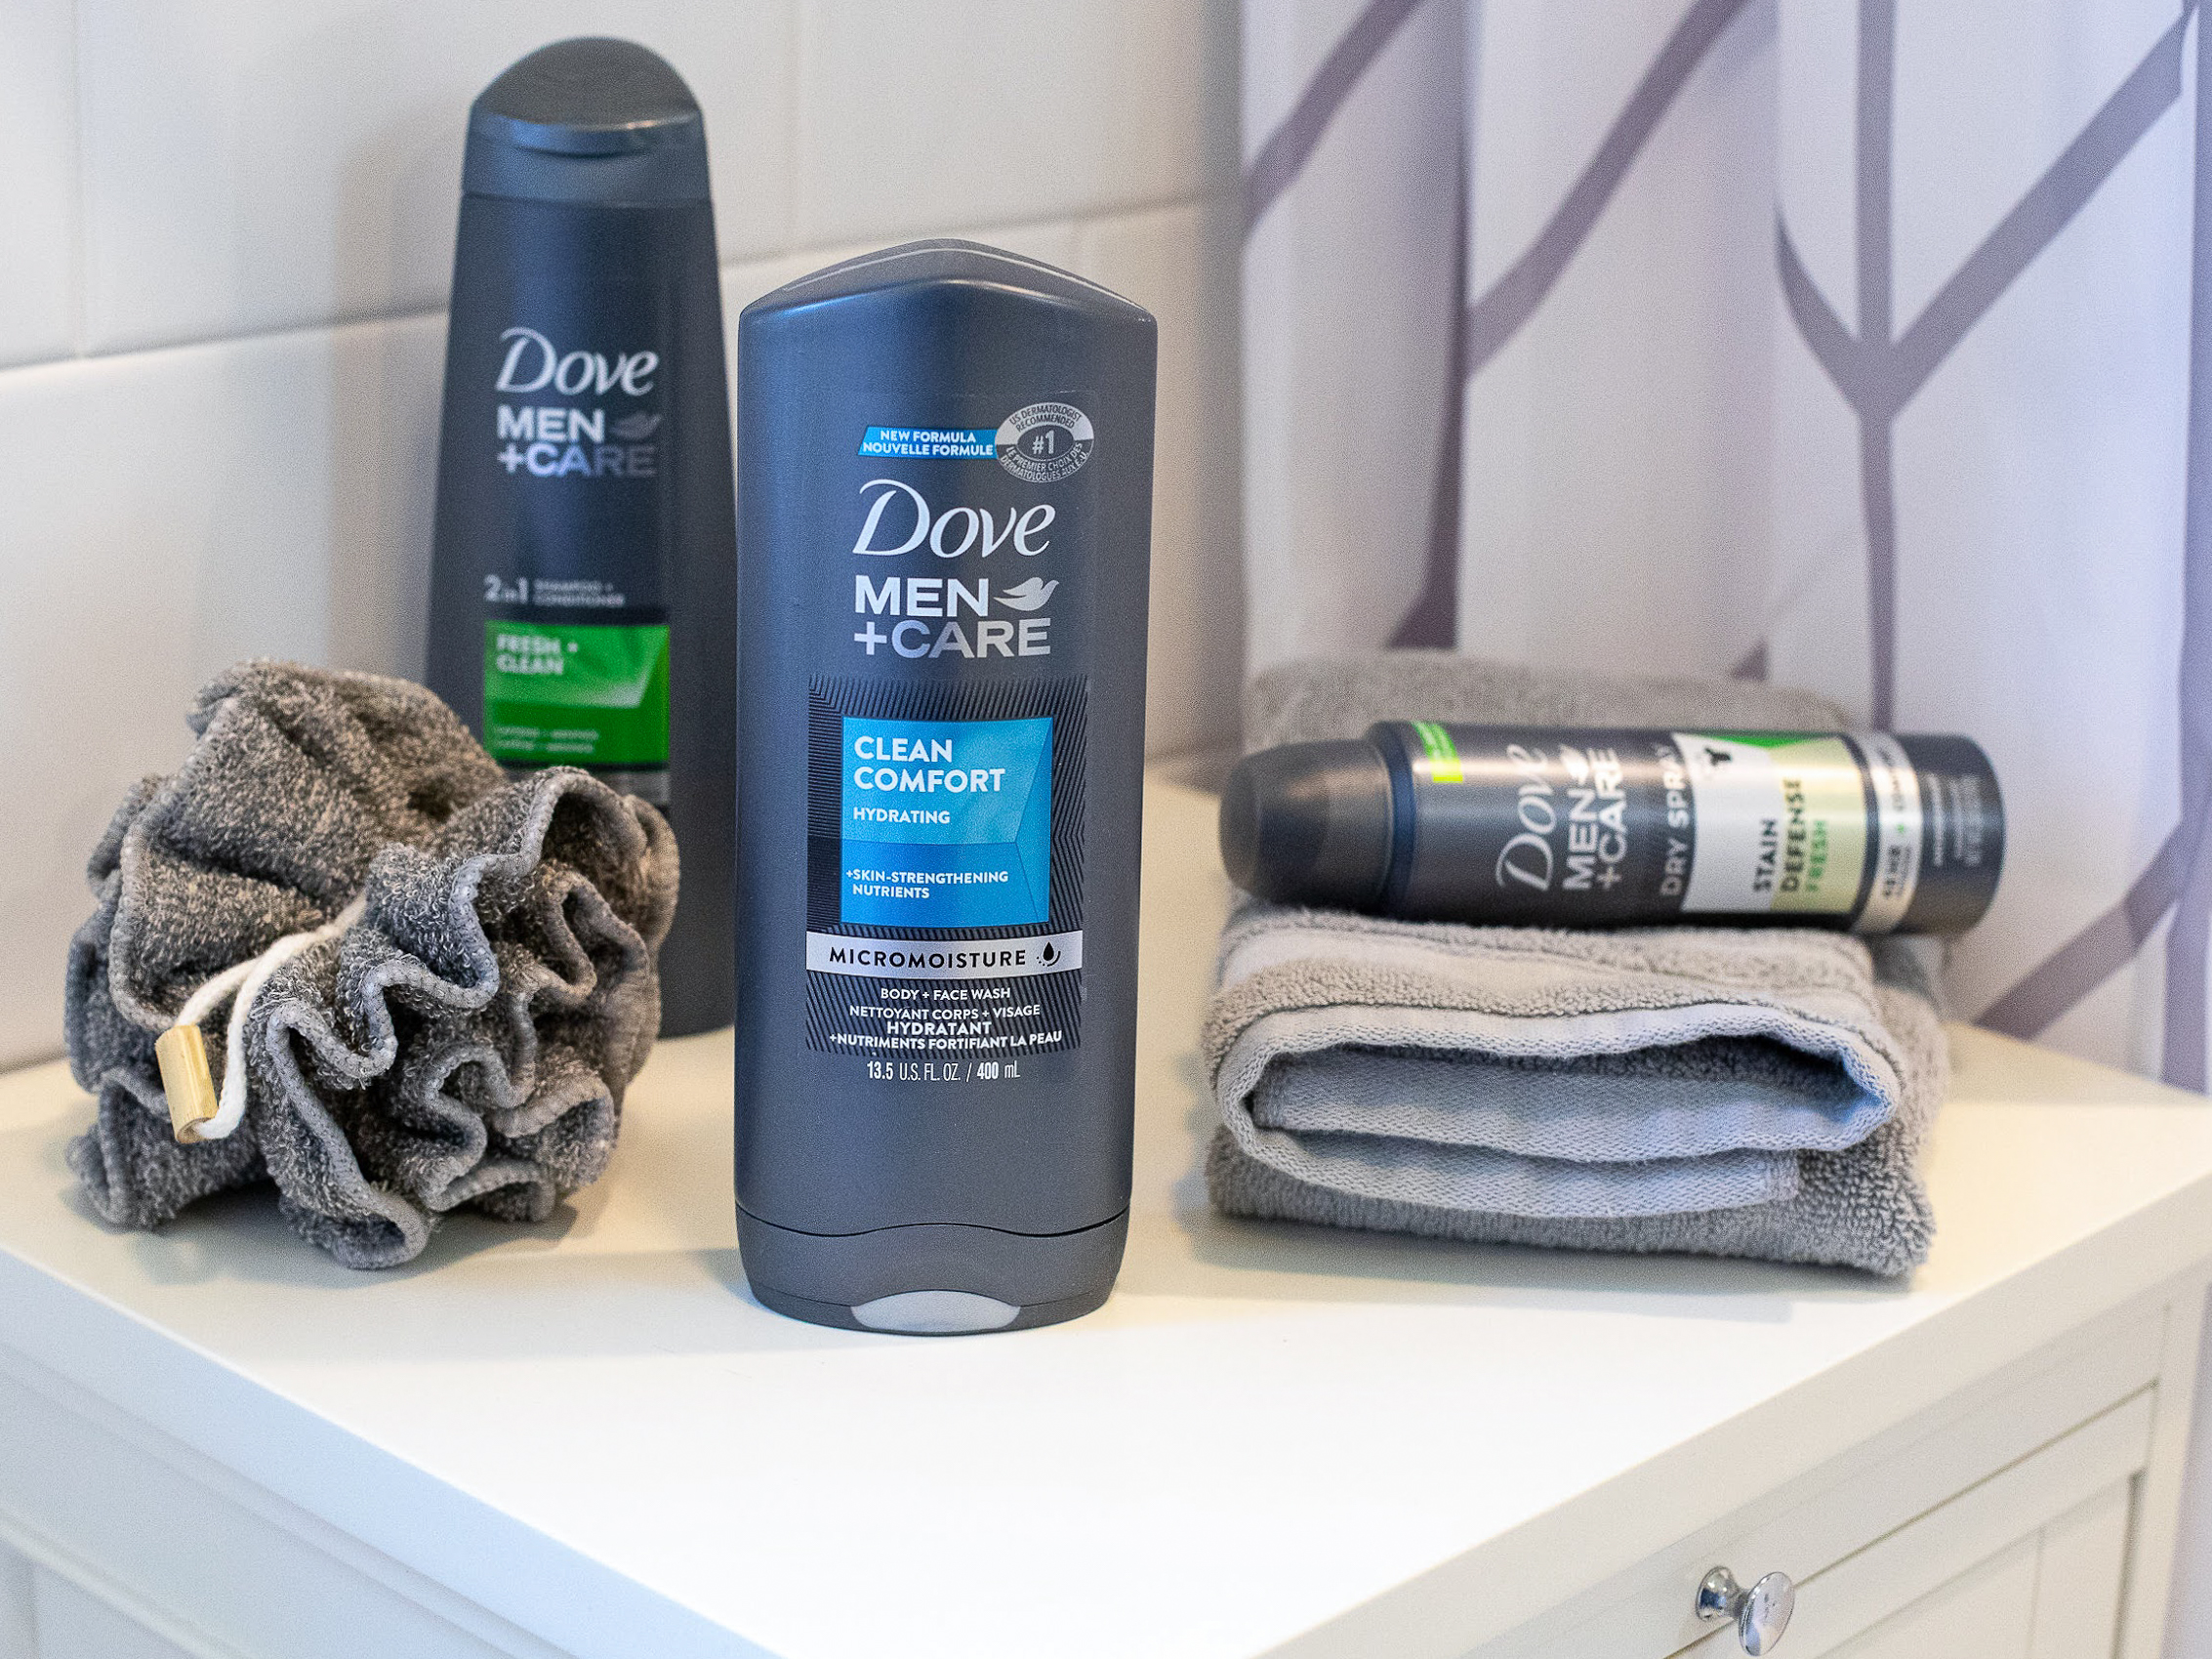 Feel Fresh For Game Day With Super Deals On Dove Men+Care Products At Your Local Publix! on I Heart Publix